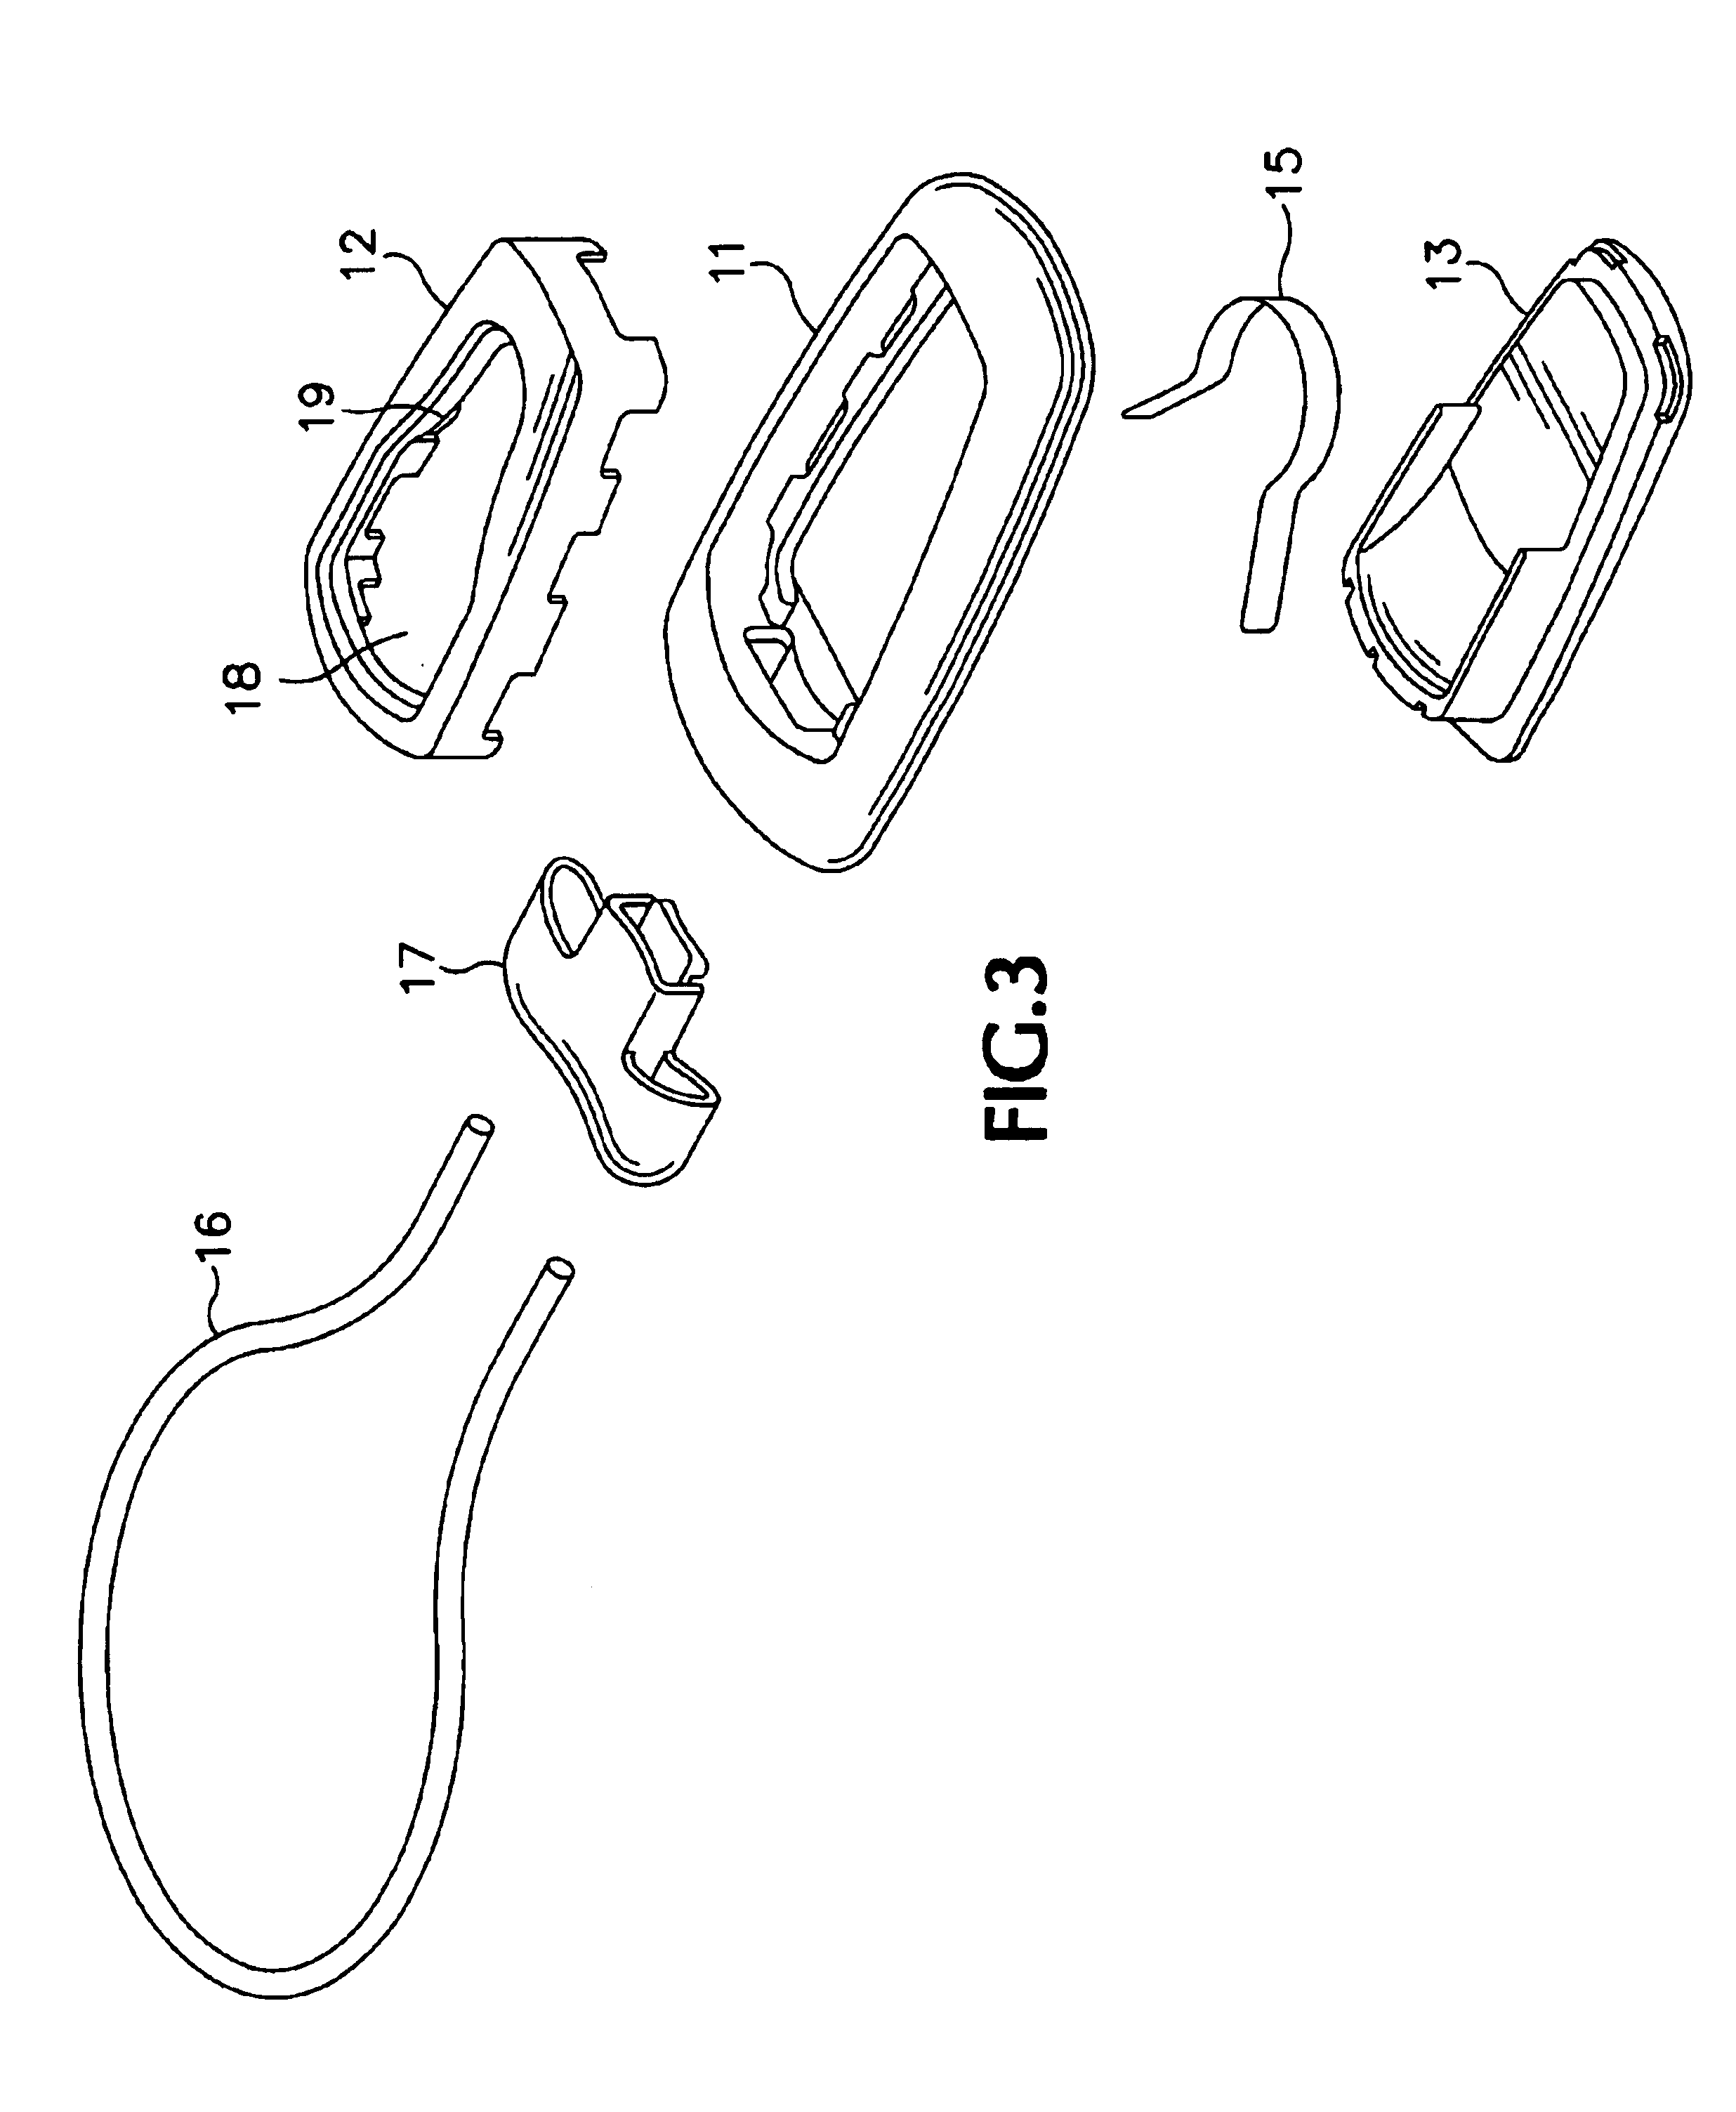 Attachment device for a mobile phone or the like